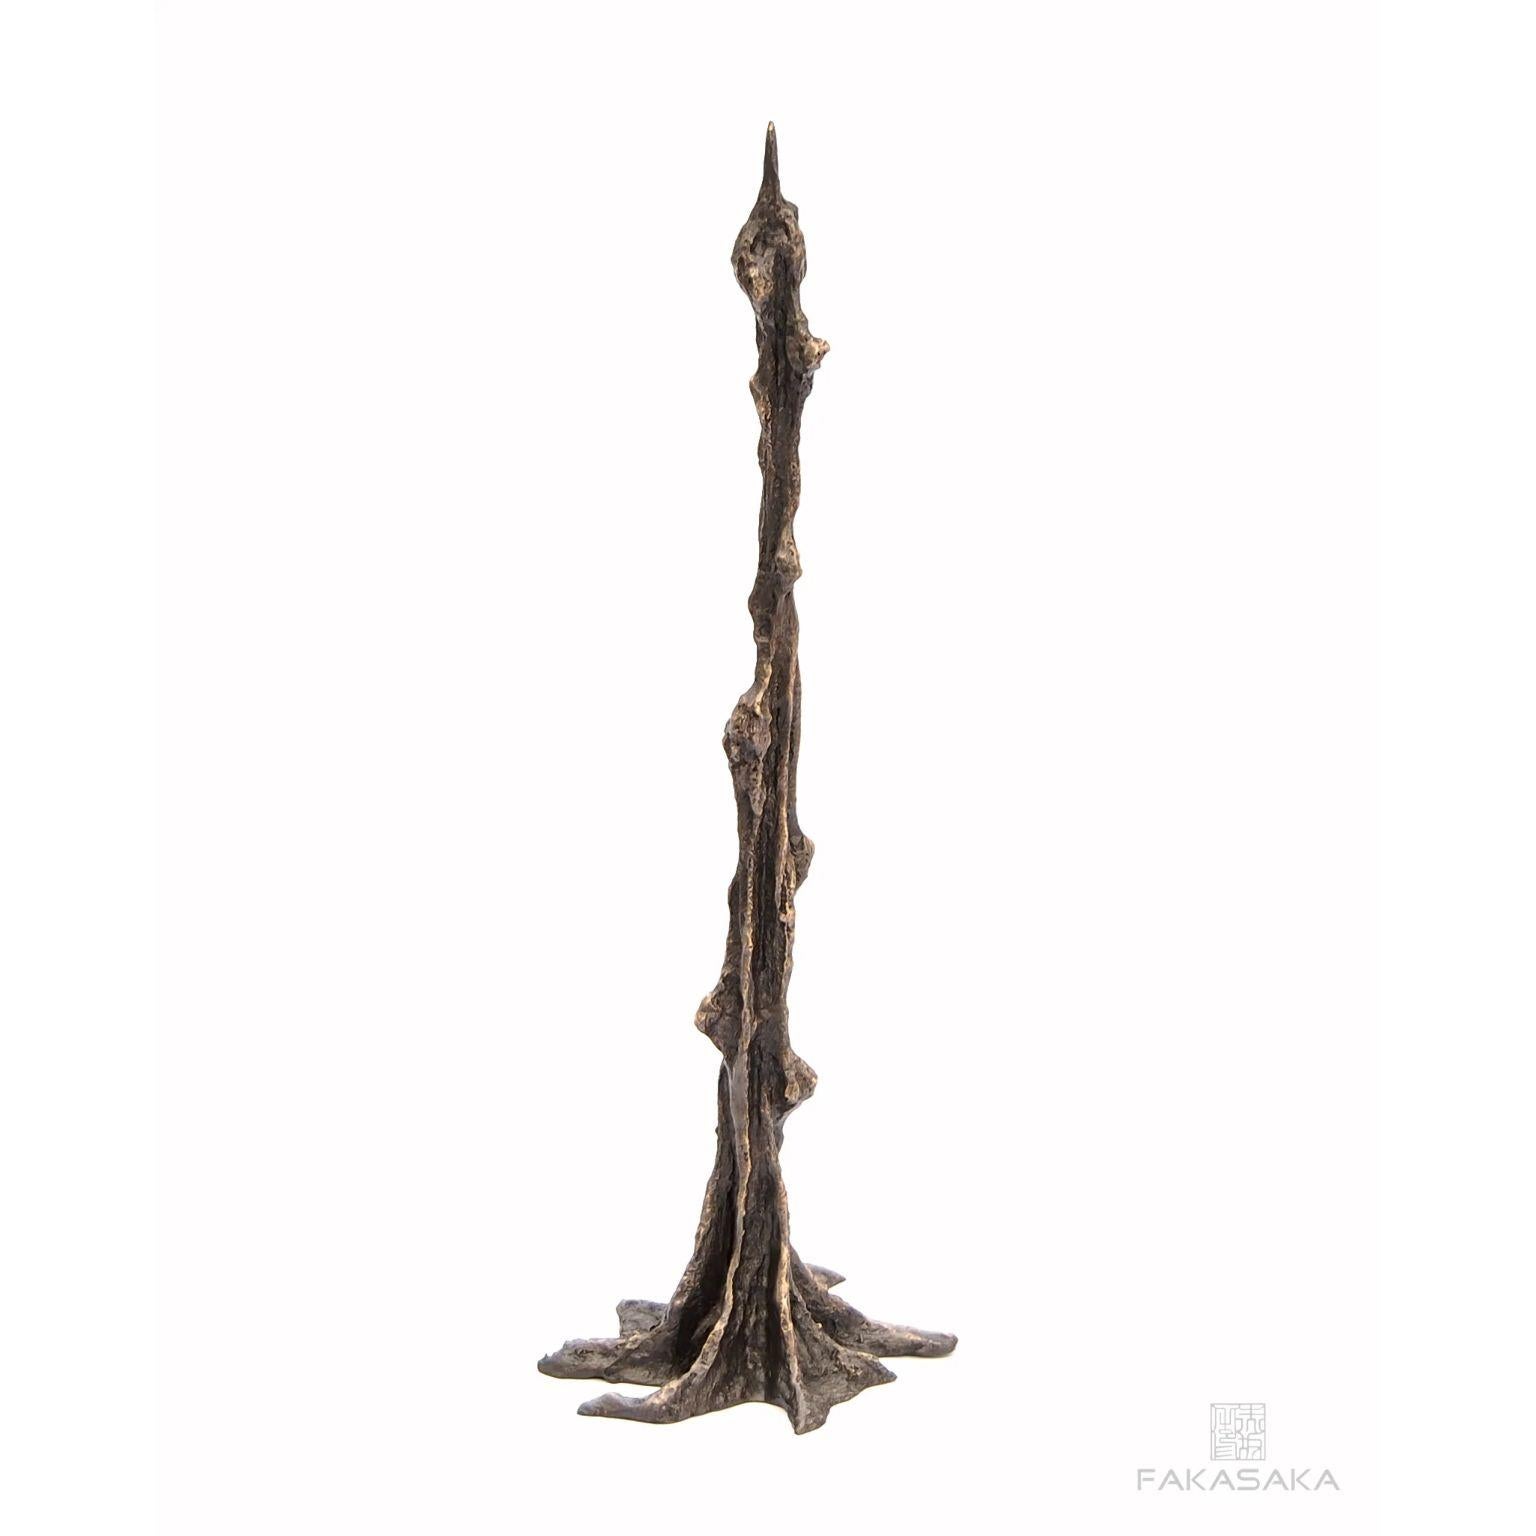 Adri candleholder by Fakasaka Design.
Dimensions: W 12.5 cm, D 10 cm, H 36.5 cm.
Materials: dark bronze.
Also available in polished bronze.

 FAKASAKA is a design company focused on production of high-end furniture, lighting, decorative objects,